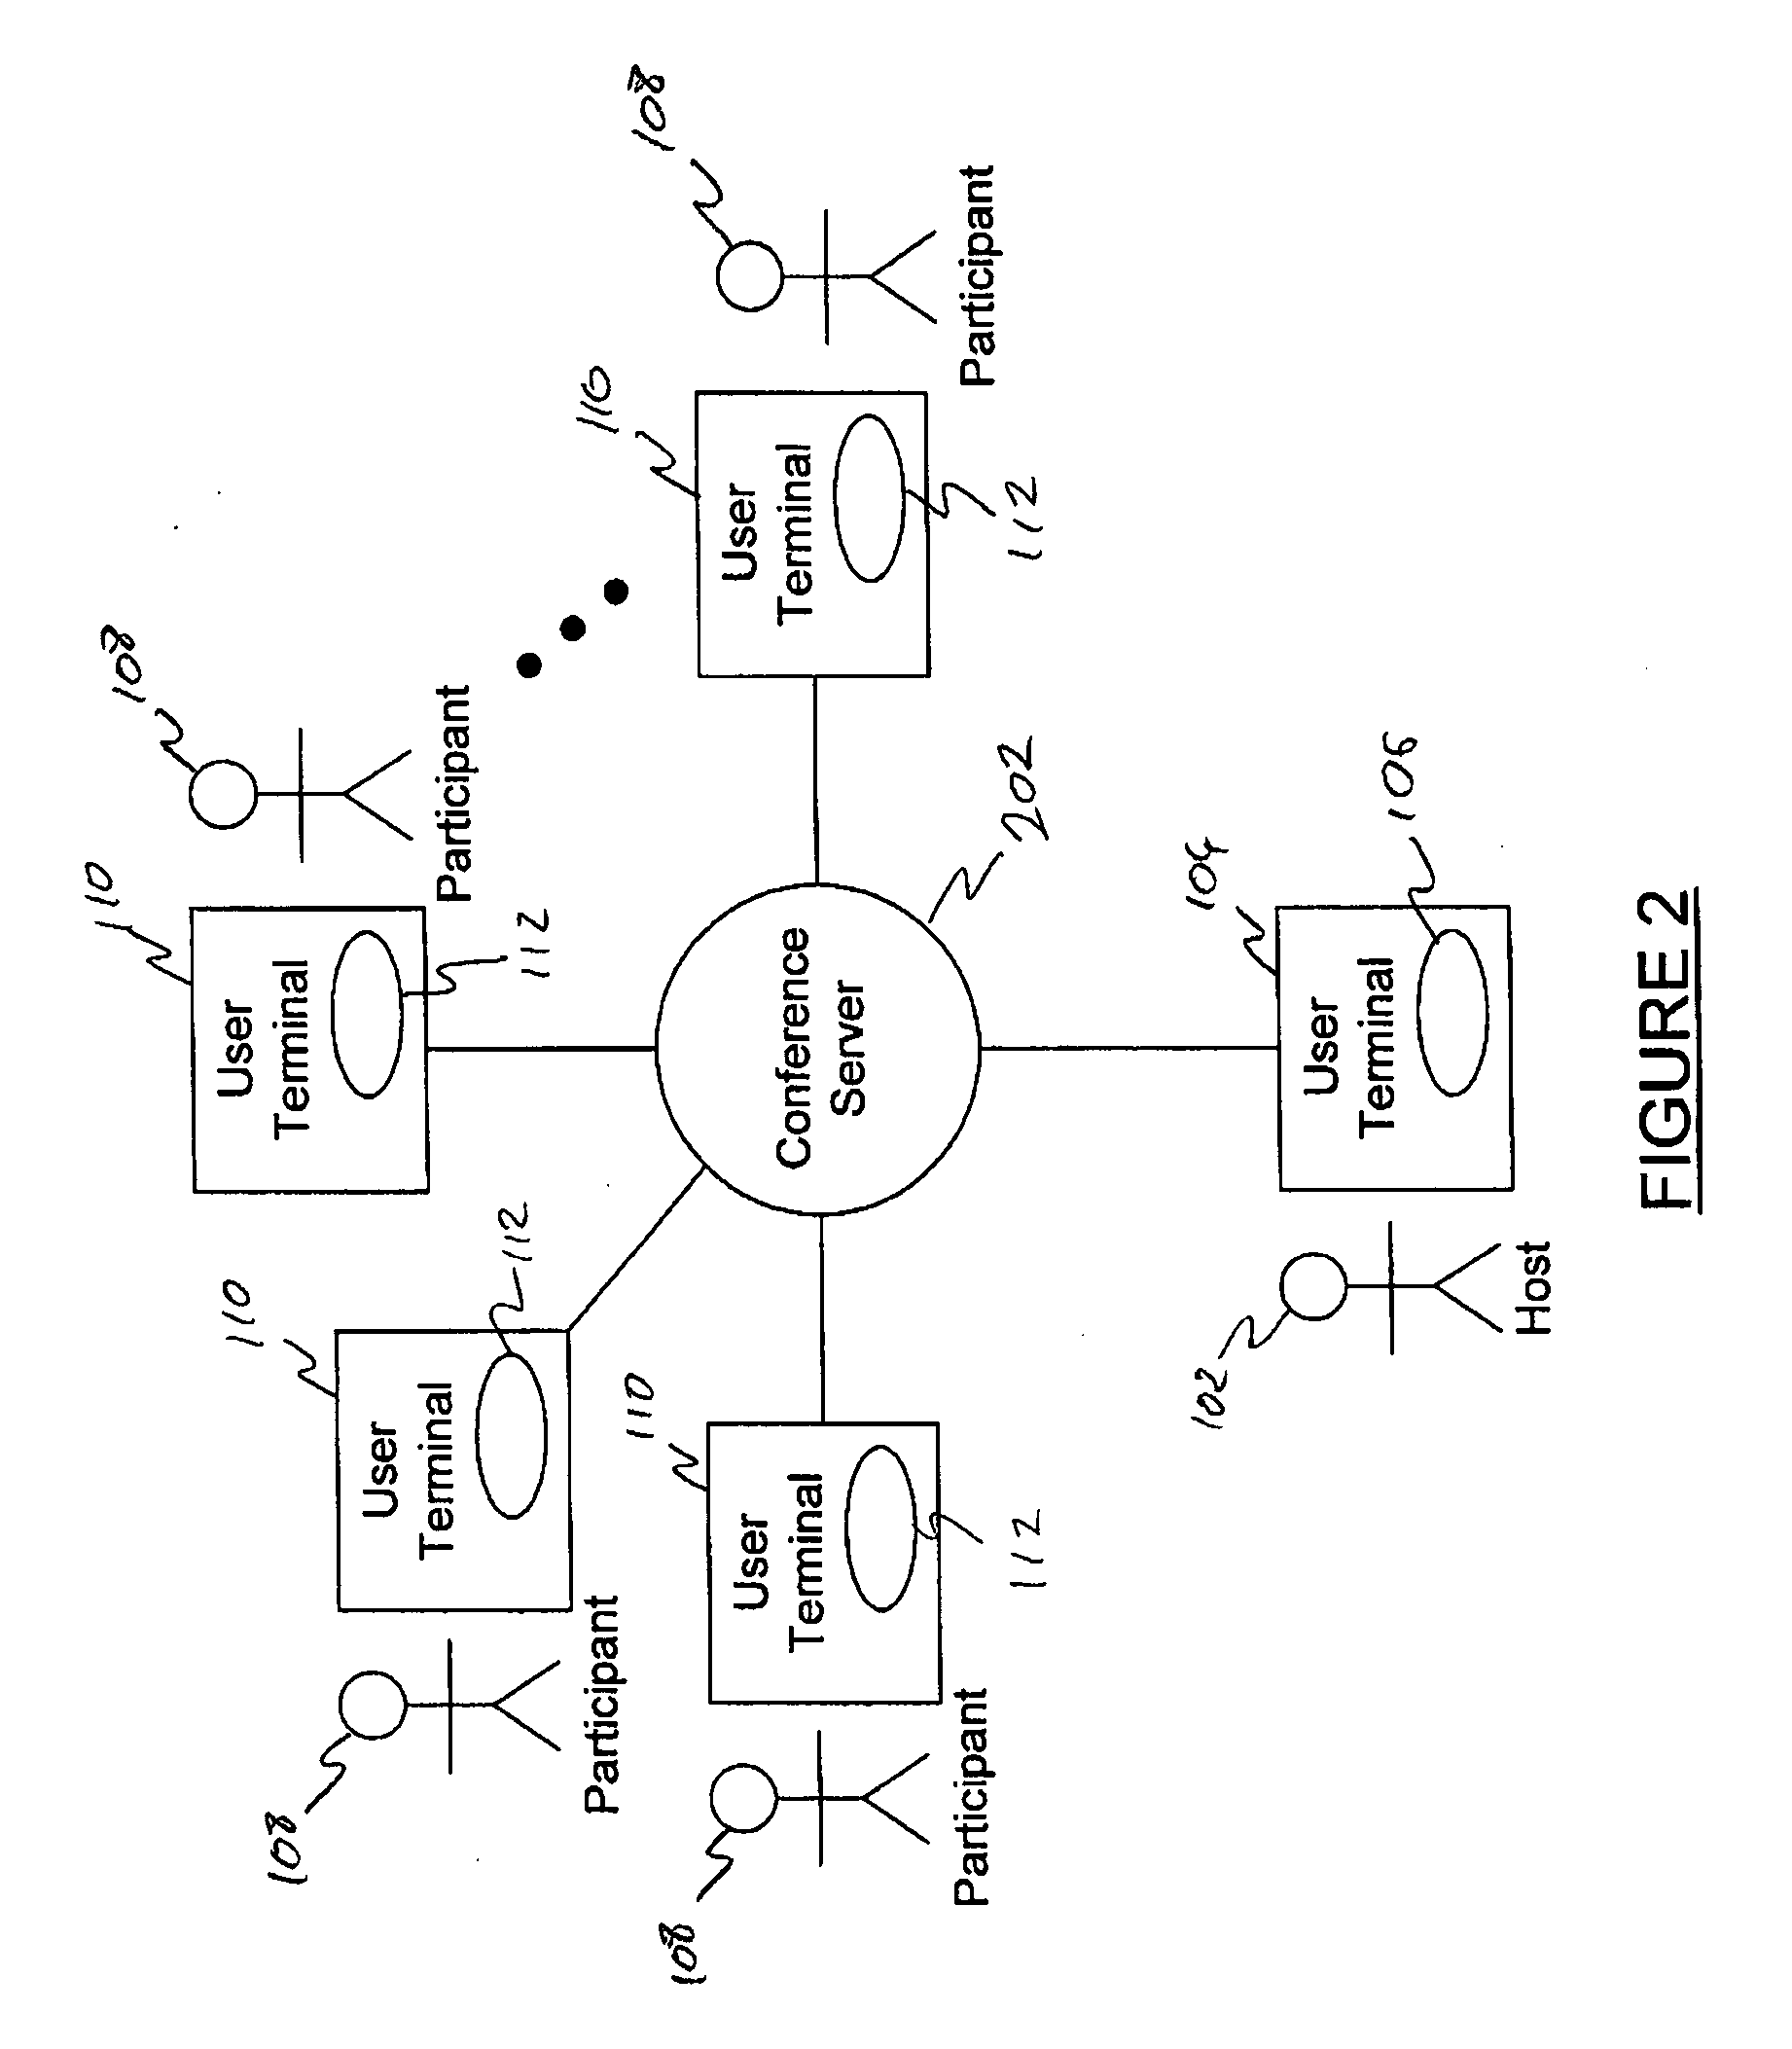 Group communication system and method